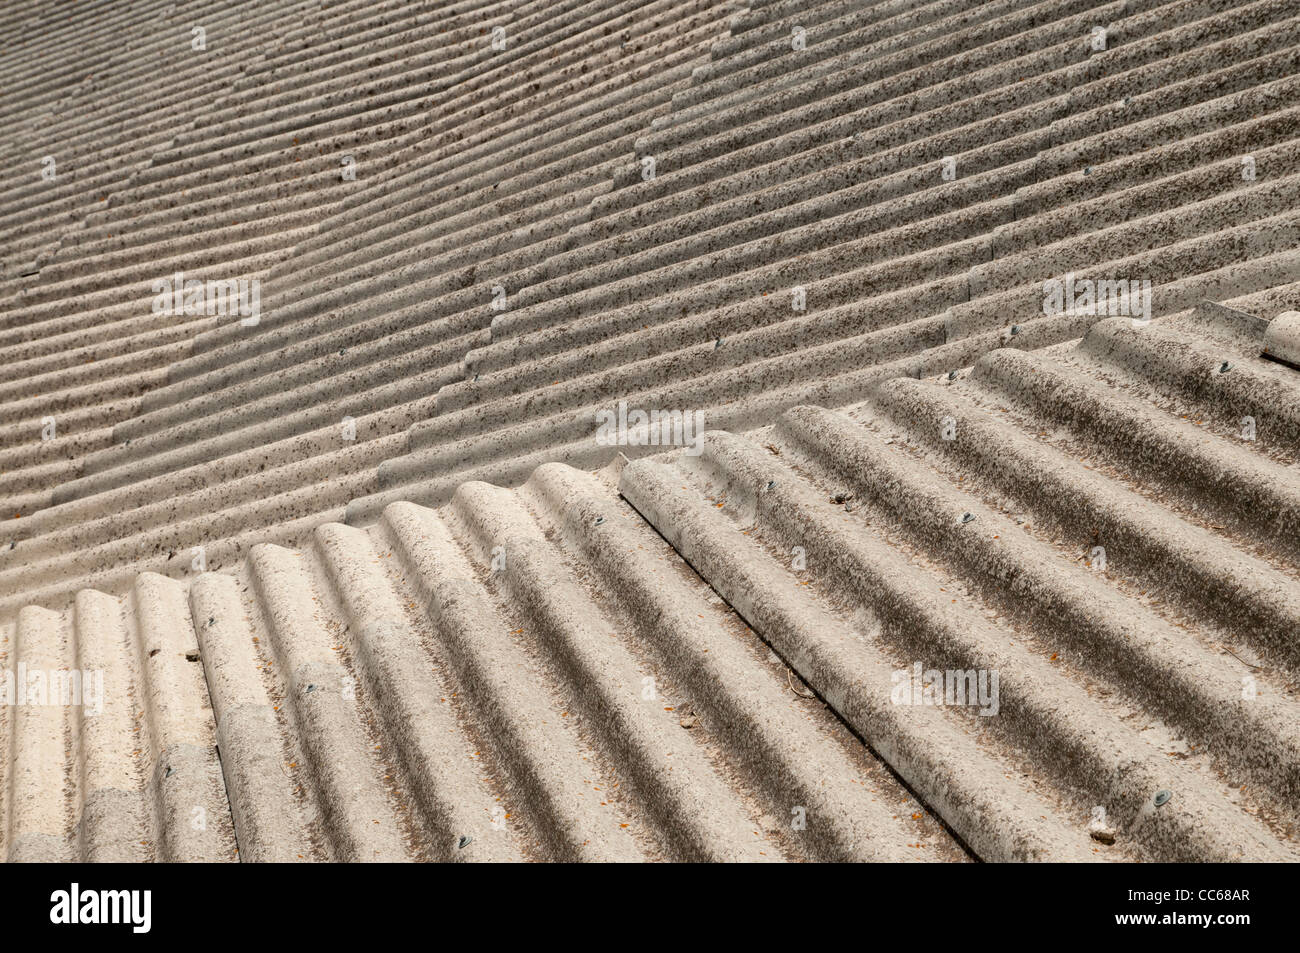 Corrugated asbestos and cement roofing material covering a backyard, Spain Stock Photo